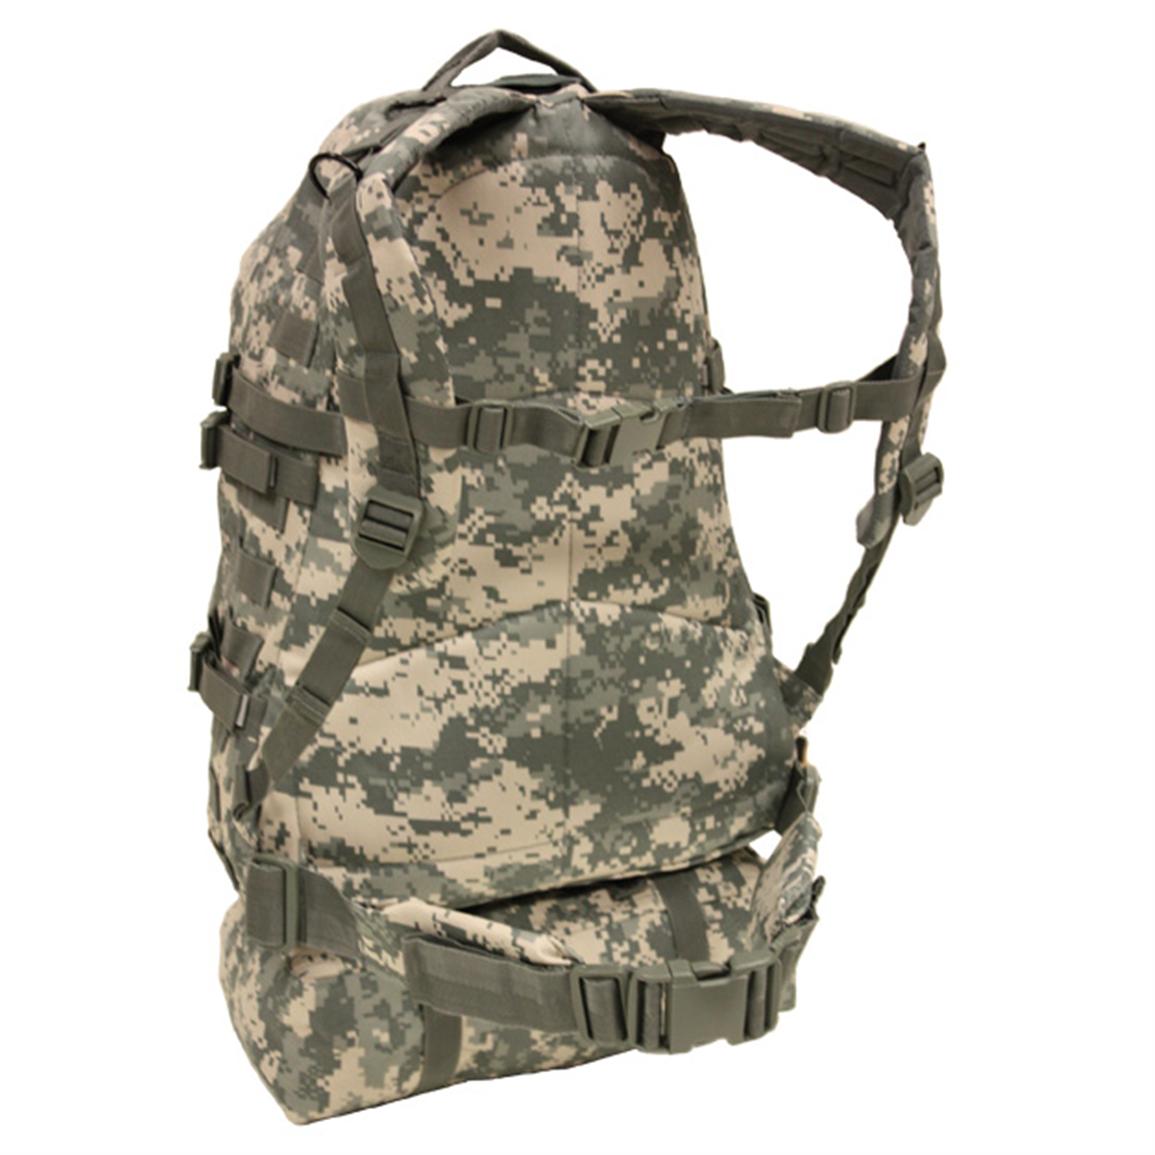 Military-style Tactical Gear Bag - 114620, Military Style Backpacks ...